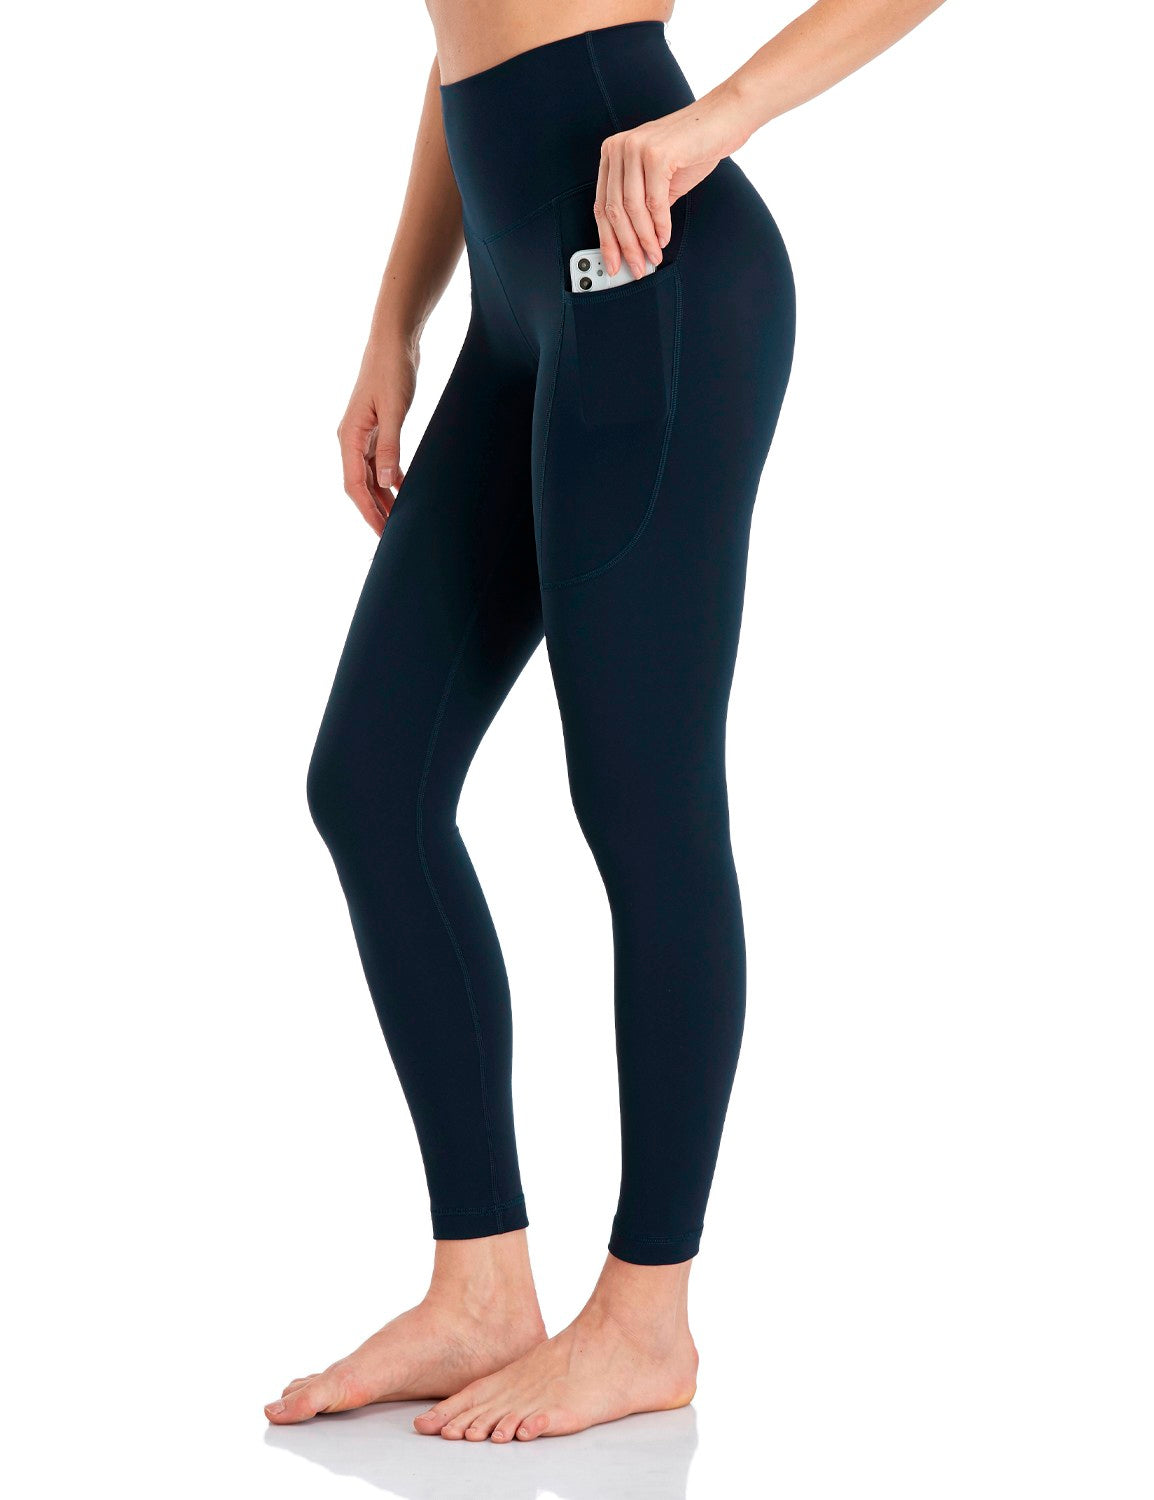 HeyNuts Essential 7/8 Leggings with Side Pockets for Women, High